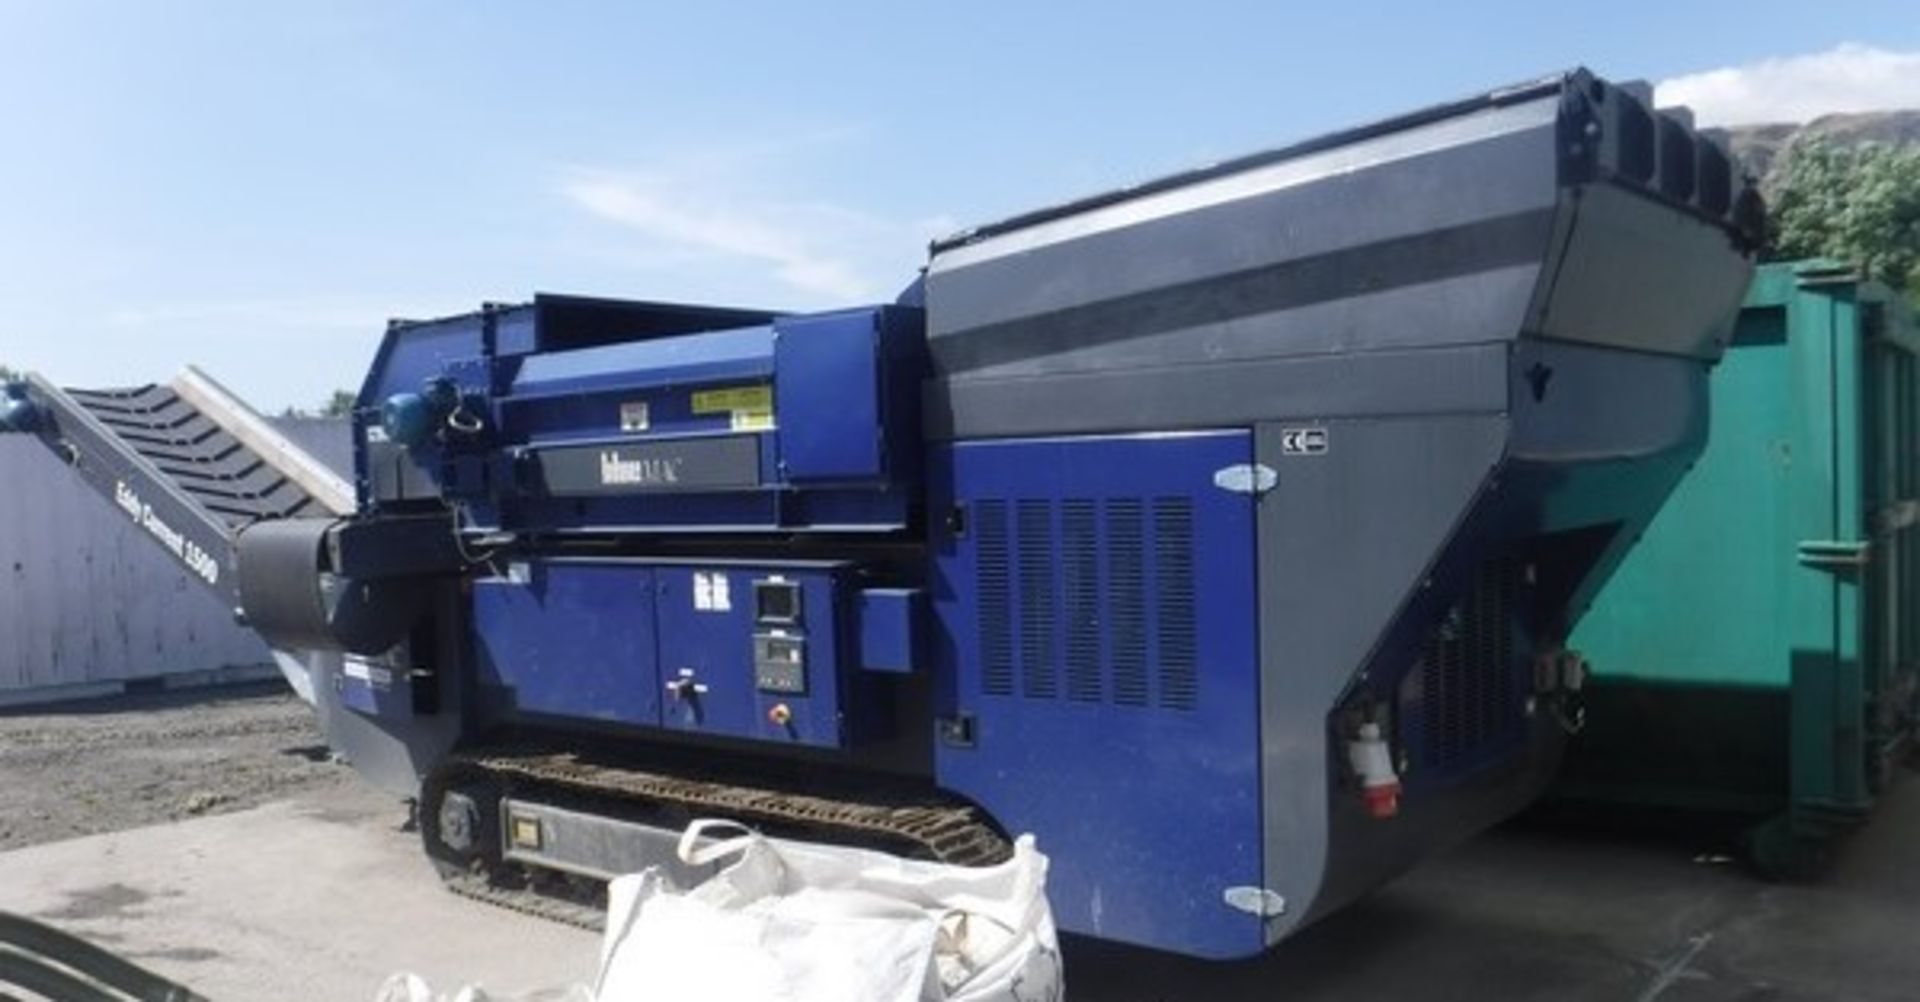 2014 BLUE MAC MANUFACTURING LTD Eddy Current Separator (ECS) s/n 6000-010 only used for woodchip wor - Image 16 of 27